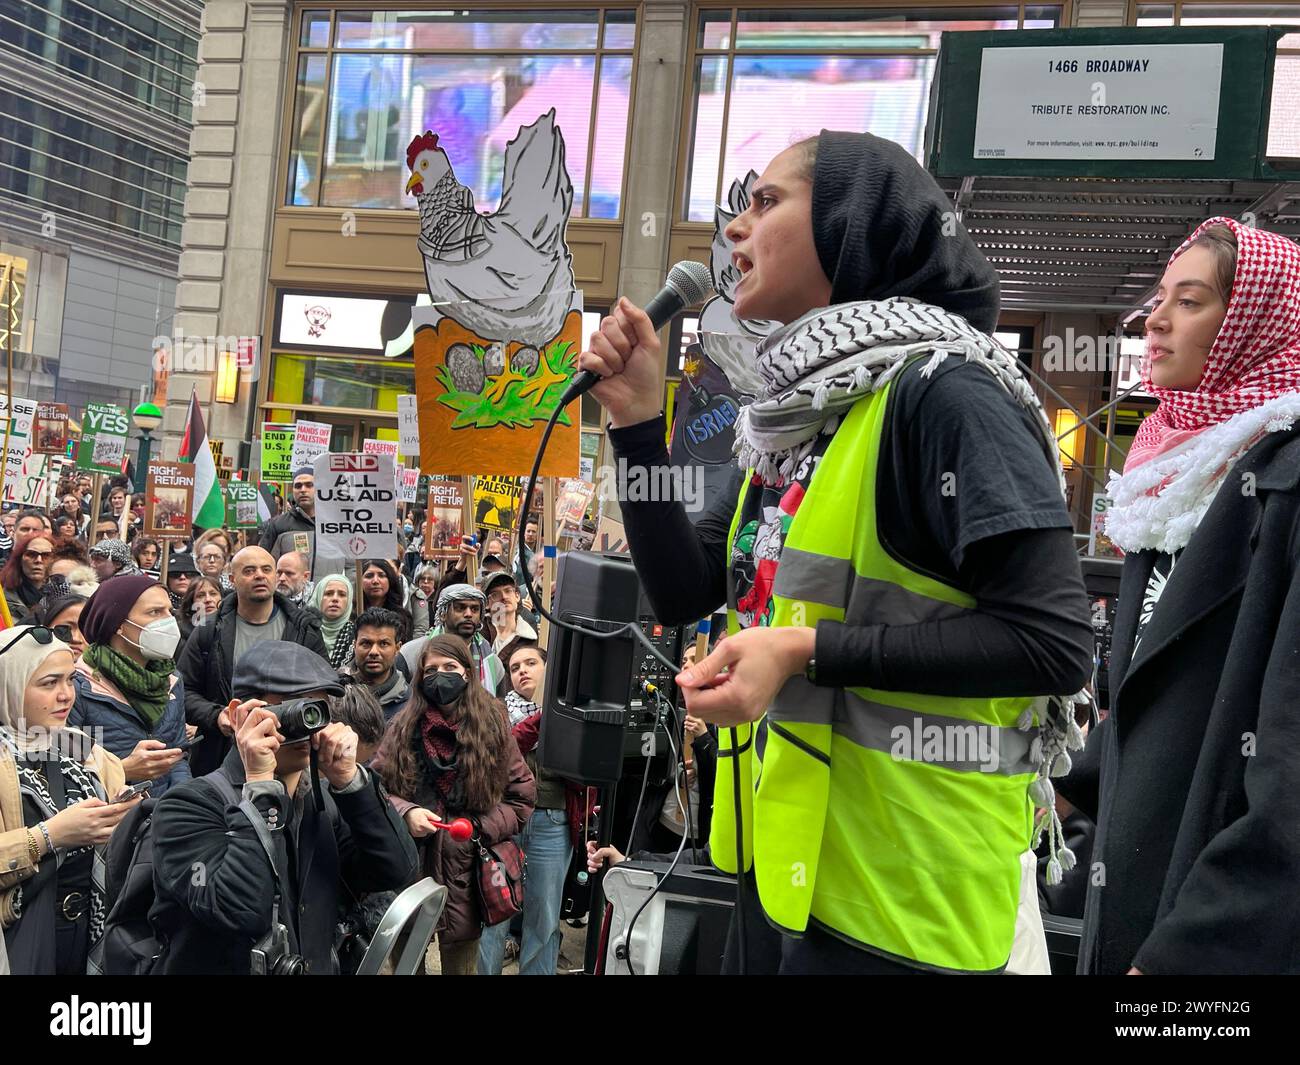 Free Gaza; Cease Fire Now demonstration in Times Square; held on March 30th known as Land Day or Day of the Land. Stock Photo